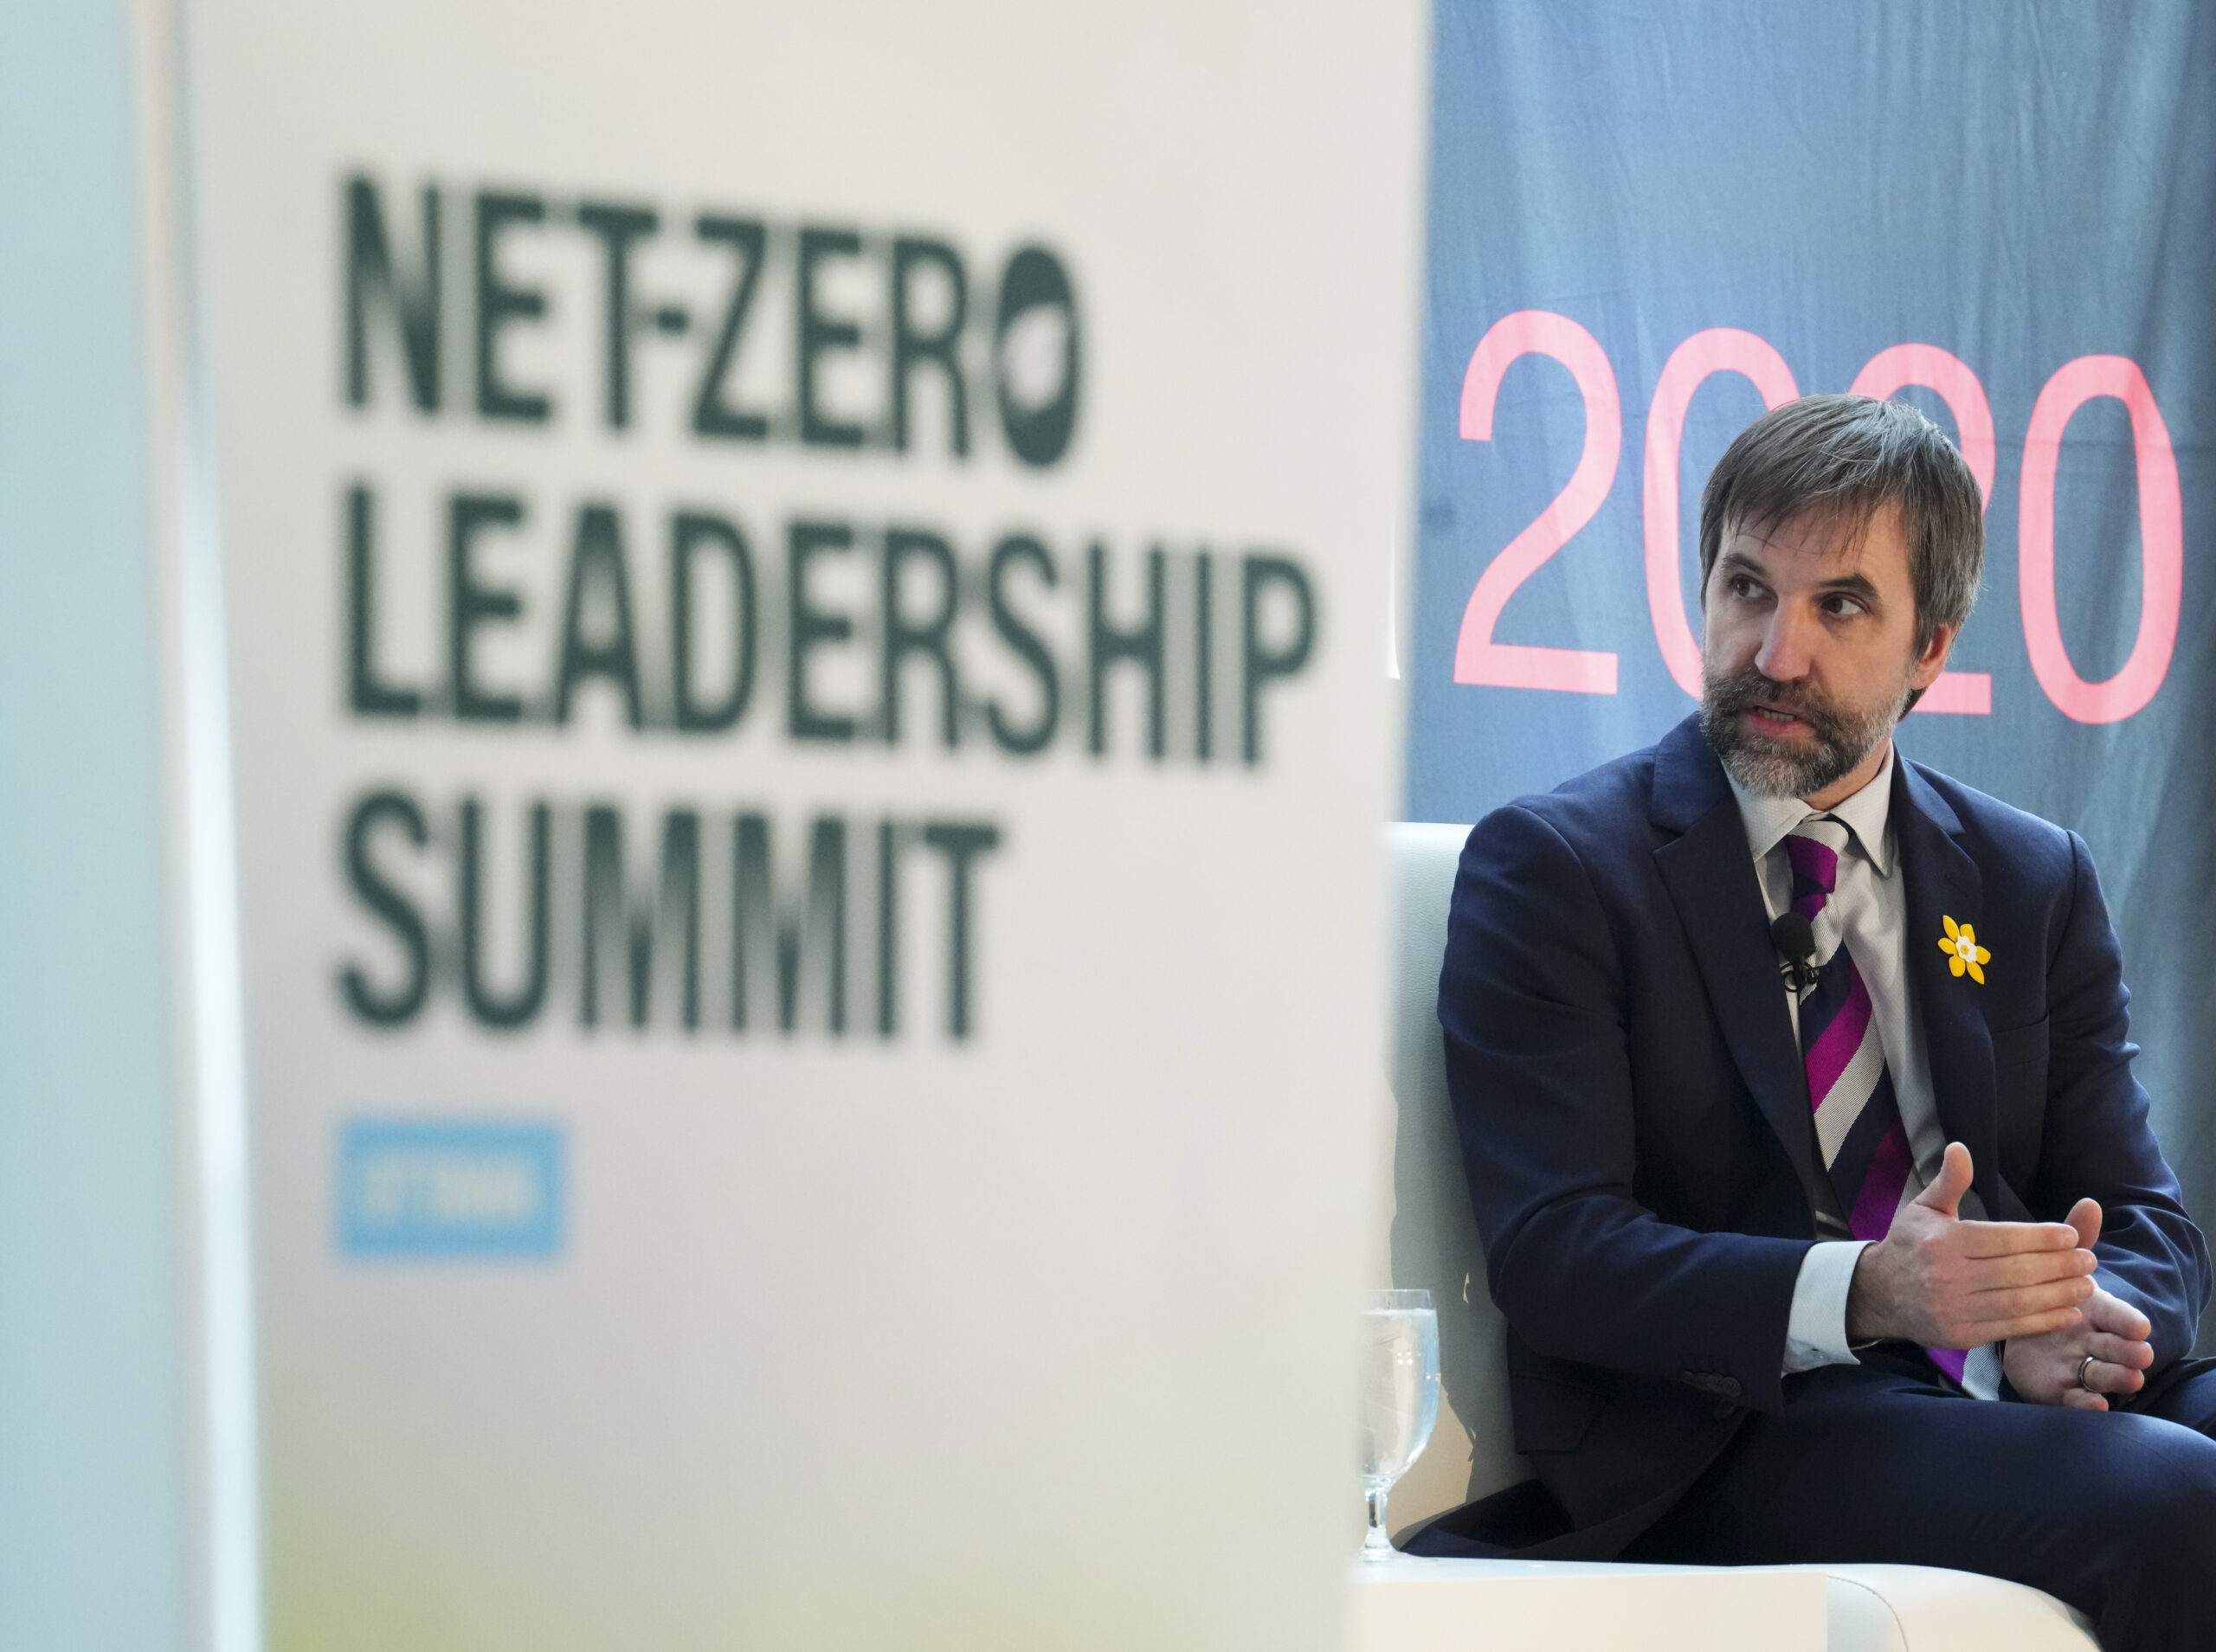 Minister of Environment and Climate Change Steven Guilbeault sits on stage at a net-zero summit